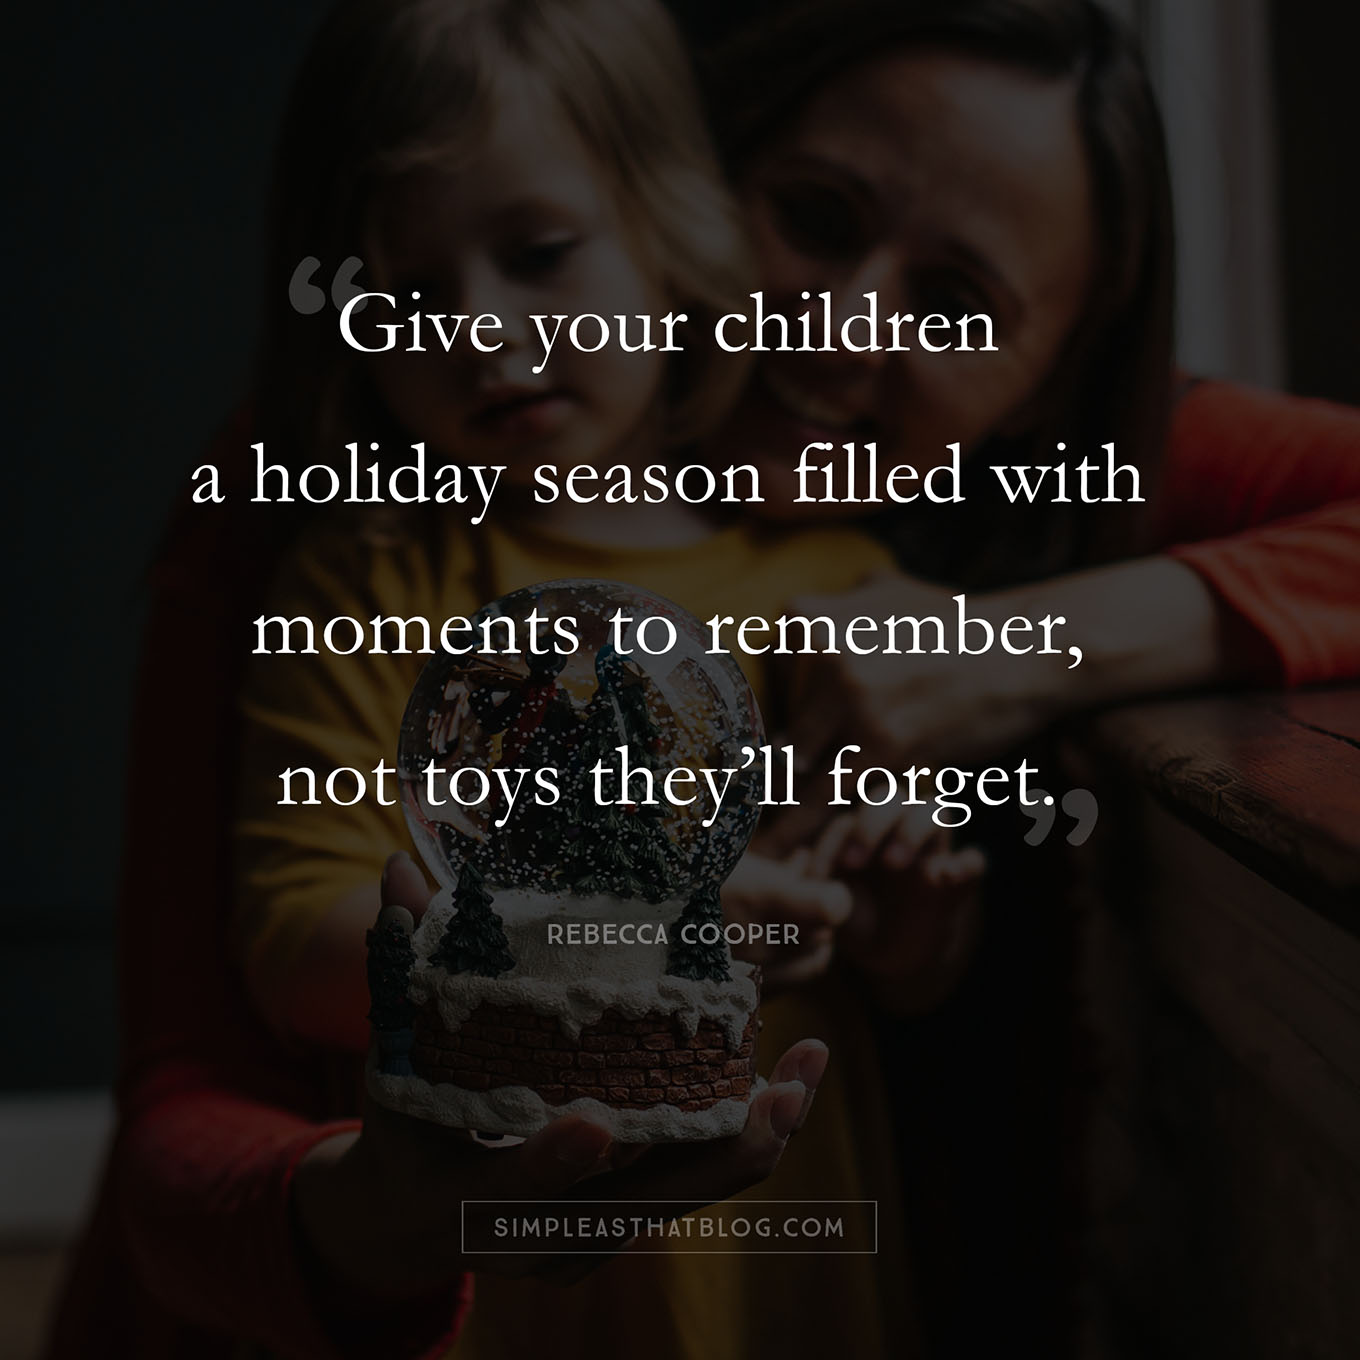 We put a lot of pressure on ourselves as moms to make the holidays special. It's so easy to adopt the myth that doing more will equal more magic.